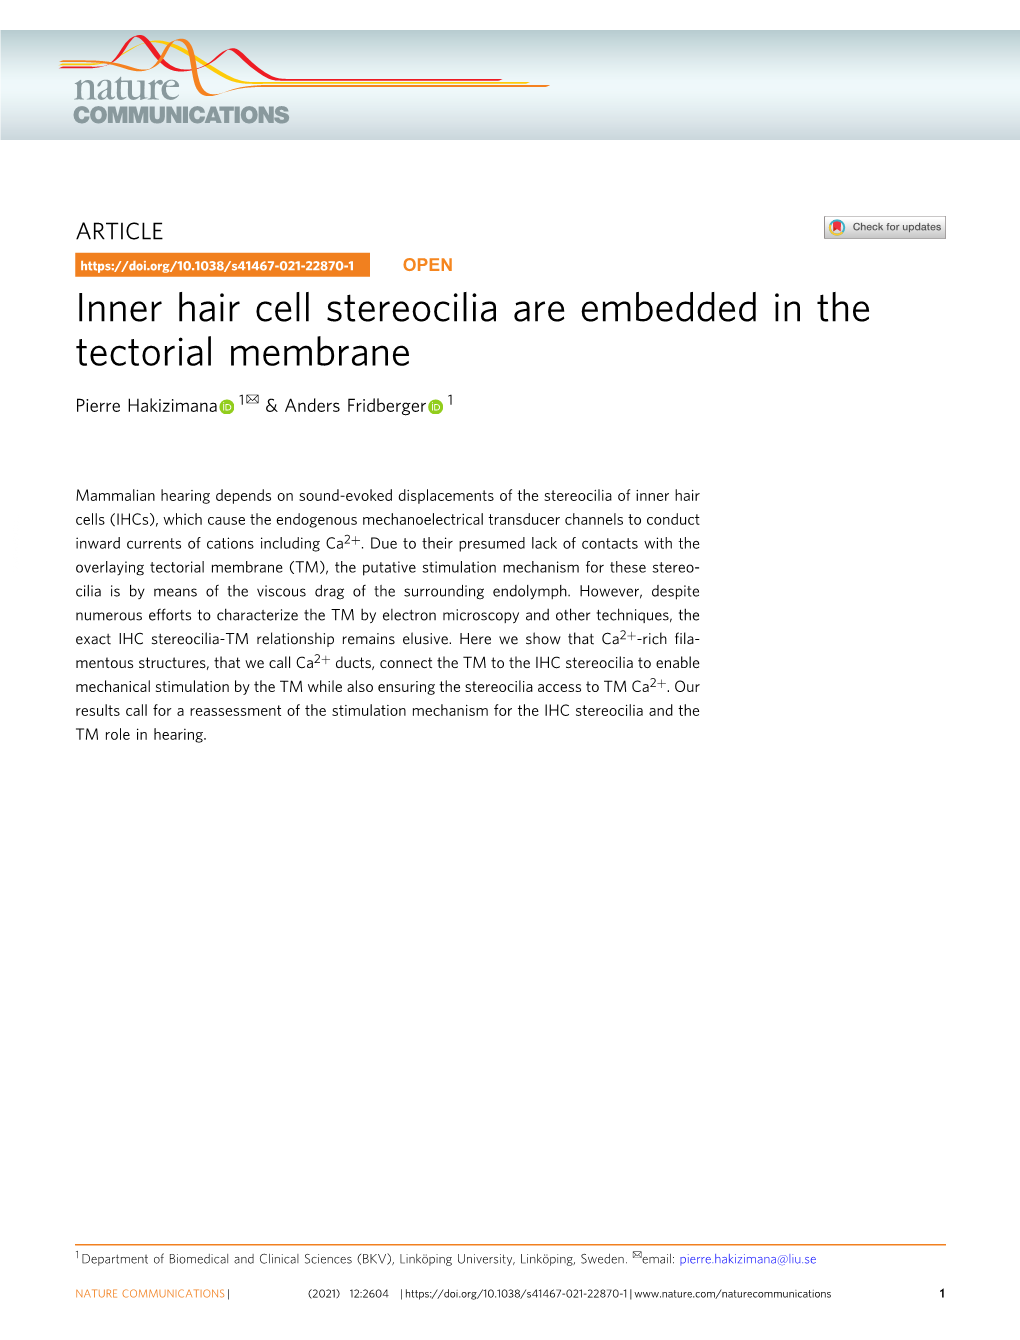 Inner Hair Cell Stereocilia Are Embedded in the Tectorial Membrane ✉ Pierre Hakizimana 1 & Anders Fridberger 1